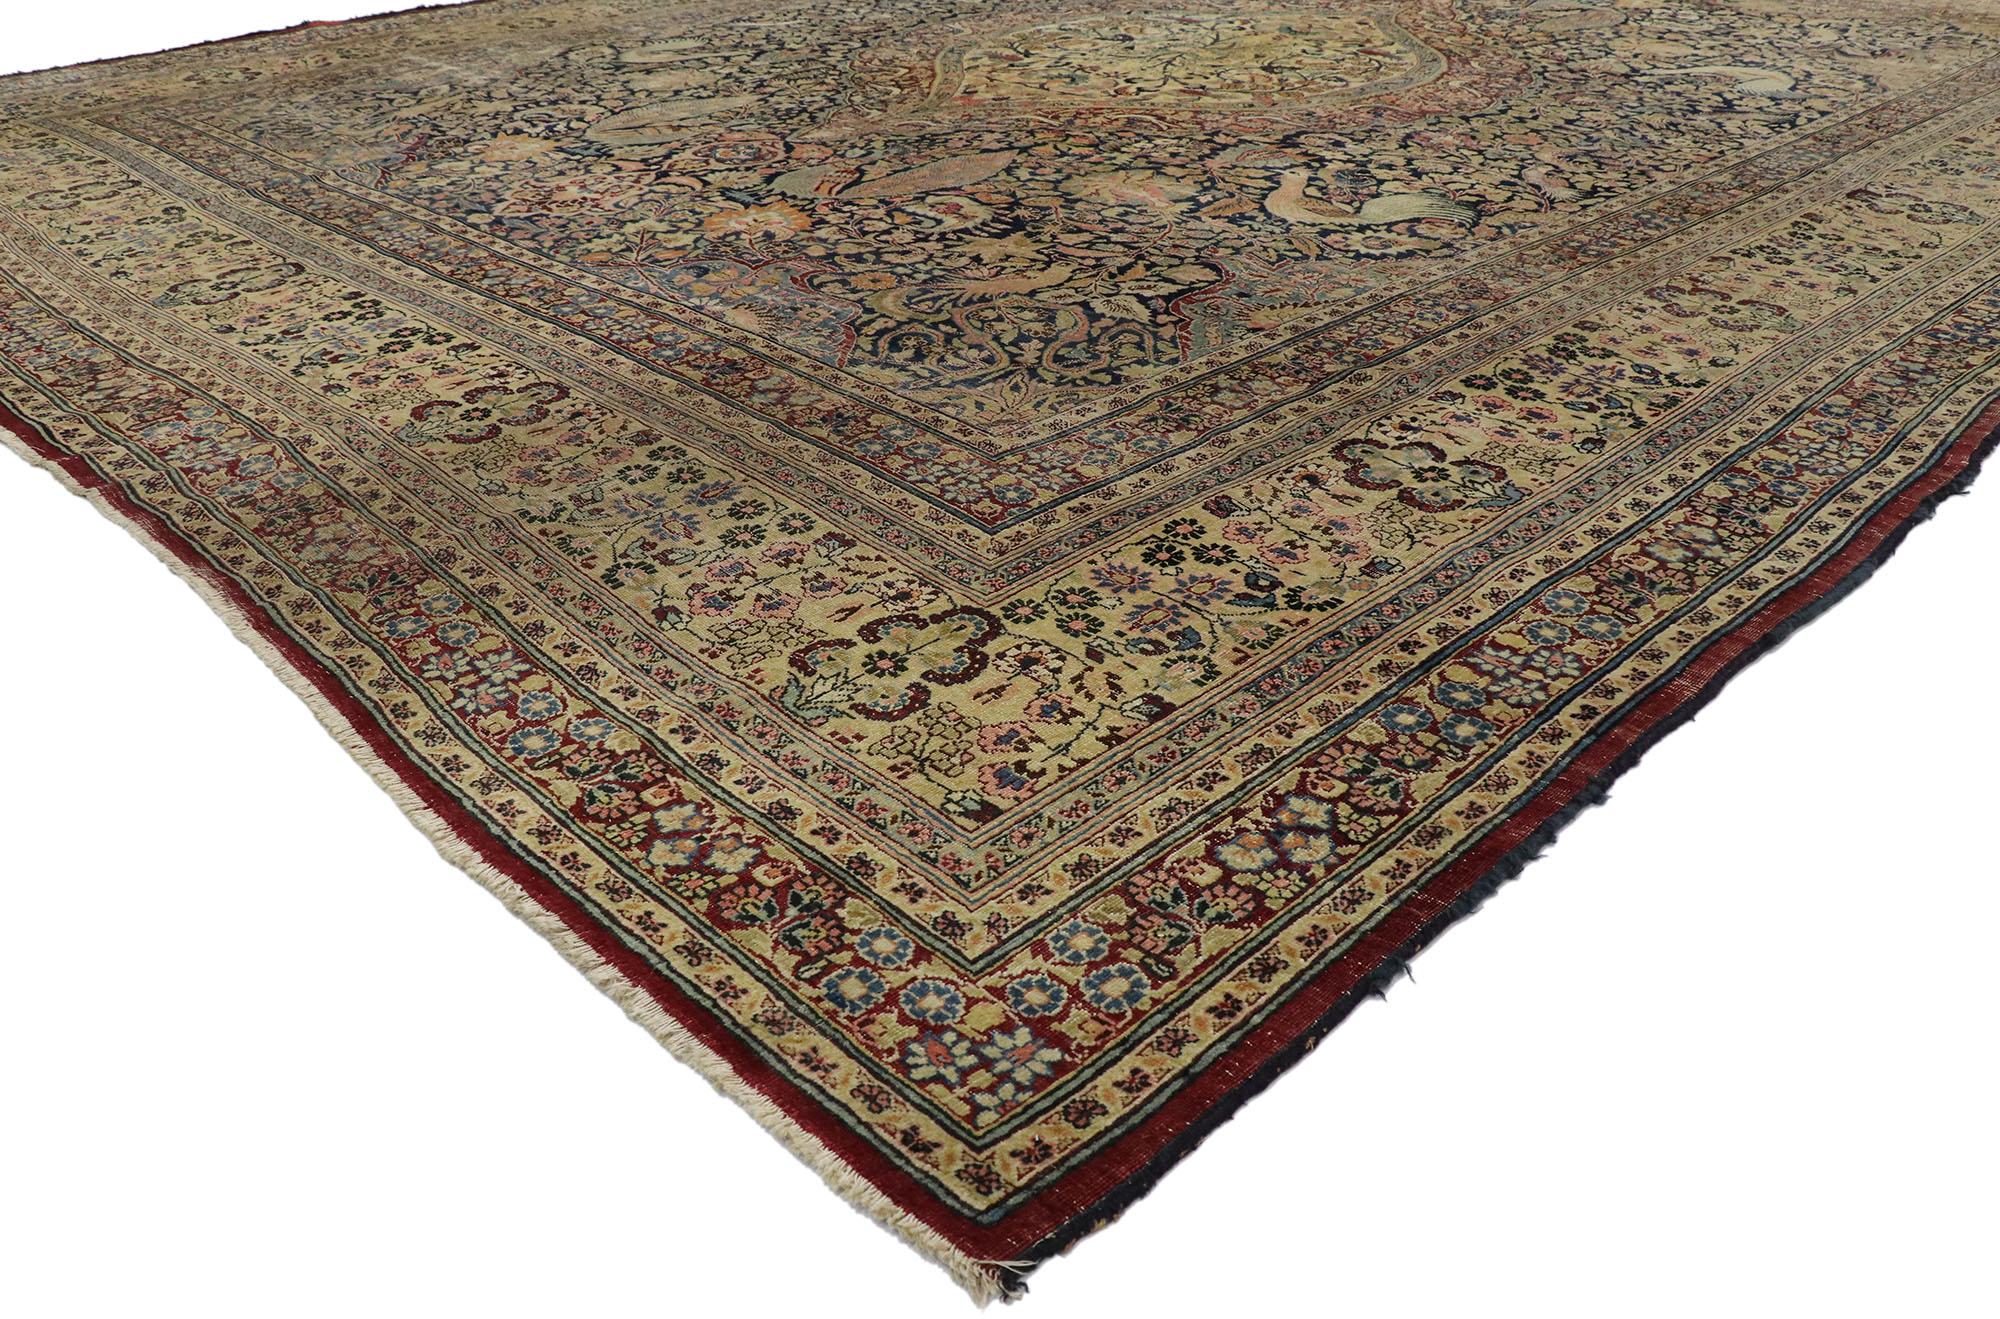 77569, distressed antique Persian Mashhad rug with Garden design and rustic English style. Cleverly composed and distinctively well-balanced, this hand knotted wool distressed antique Persian Mashhad rug will take on a curated lived-in look that